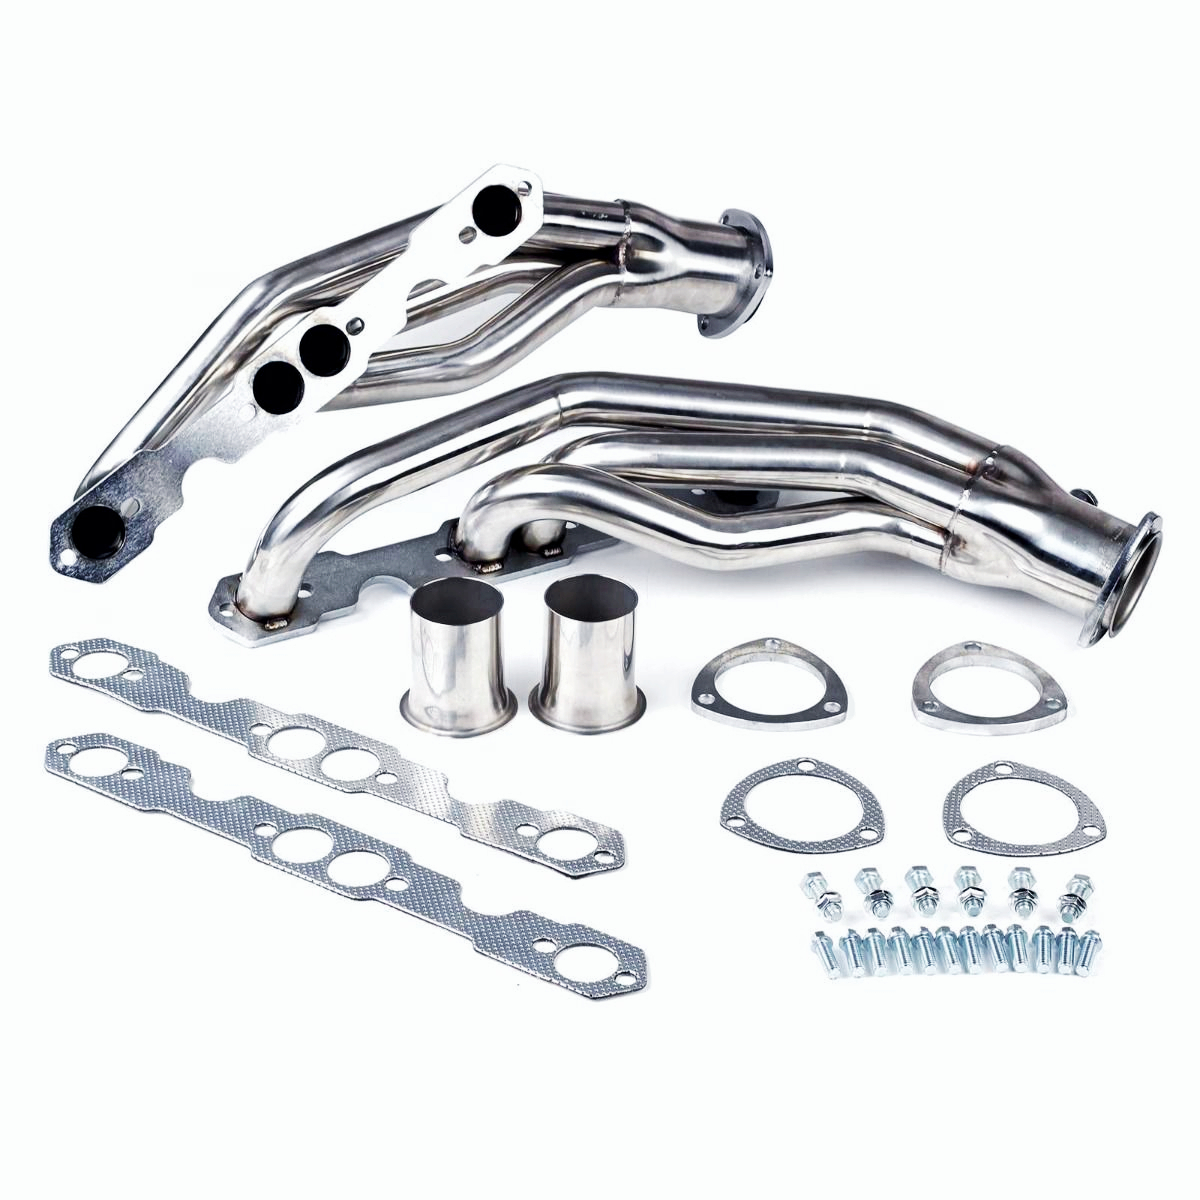 Stainless steel rating exhaust manifold for NEW Chevy 88-95 Truck 305 350 5.7L GMC